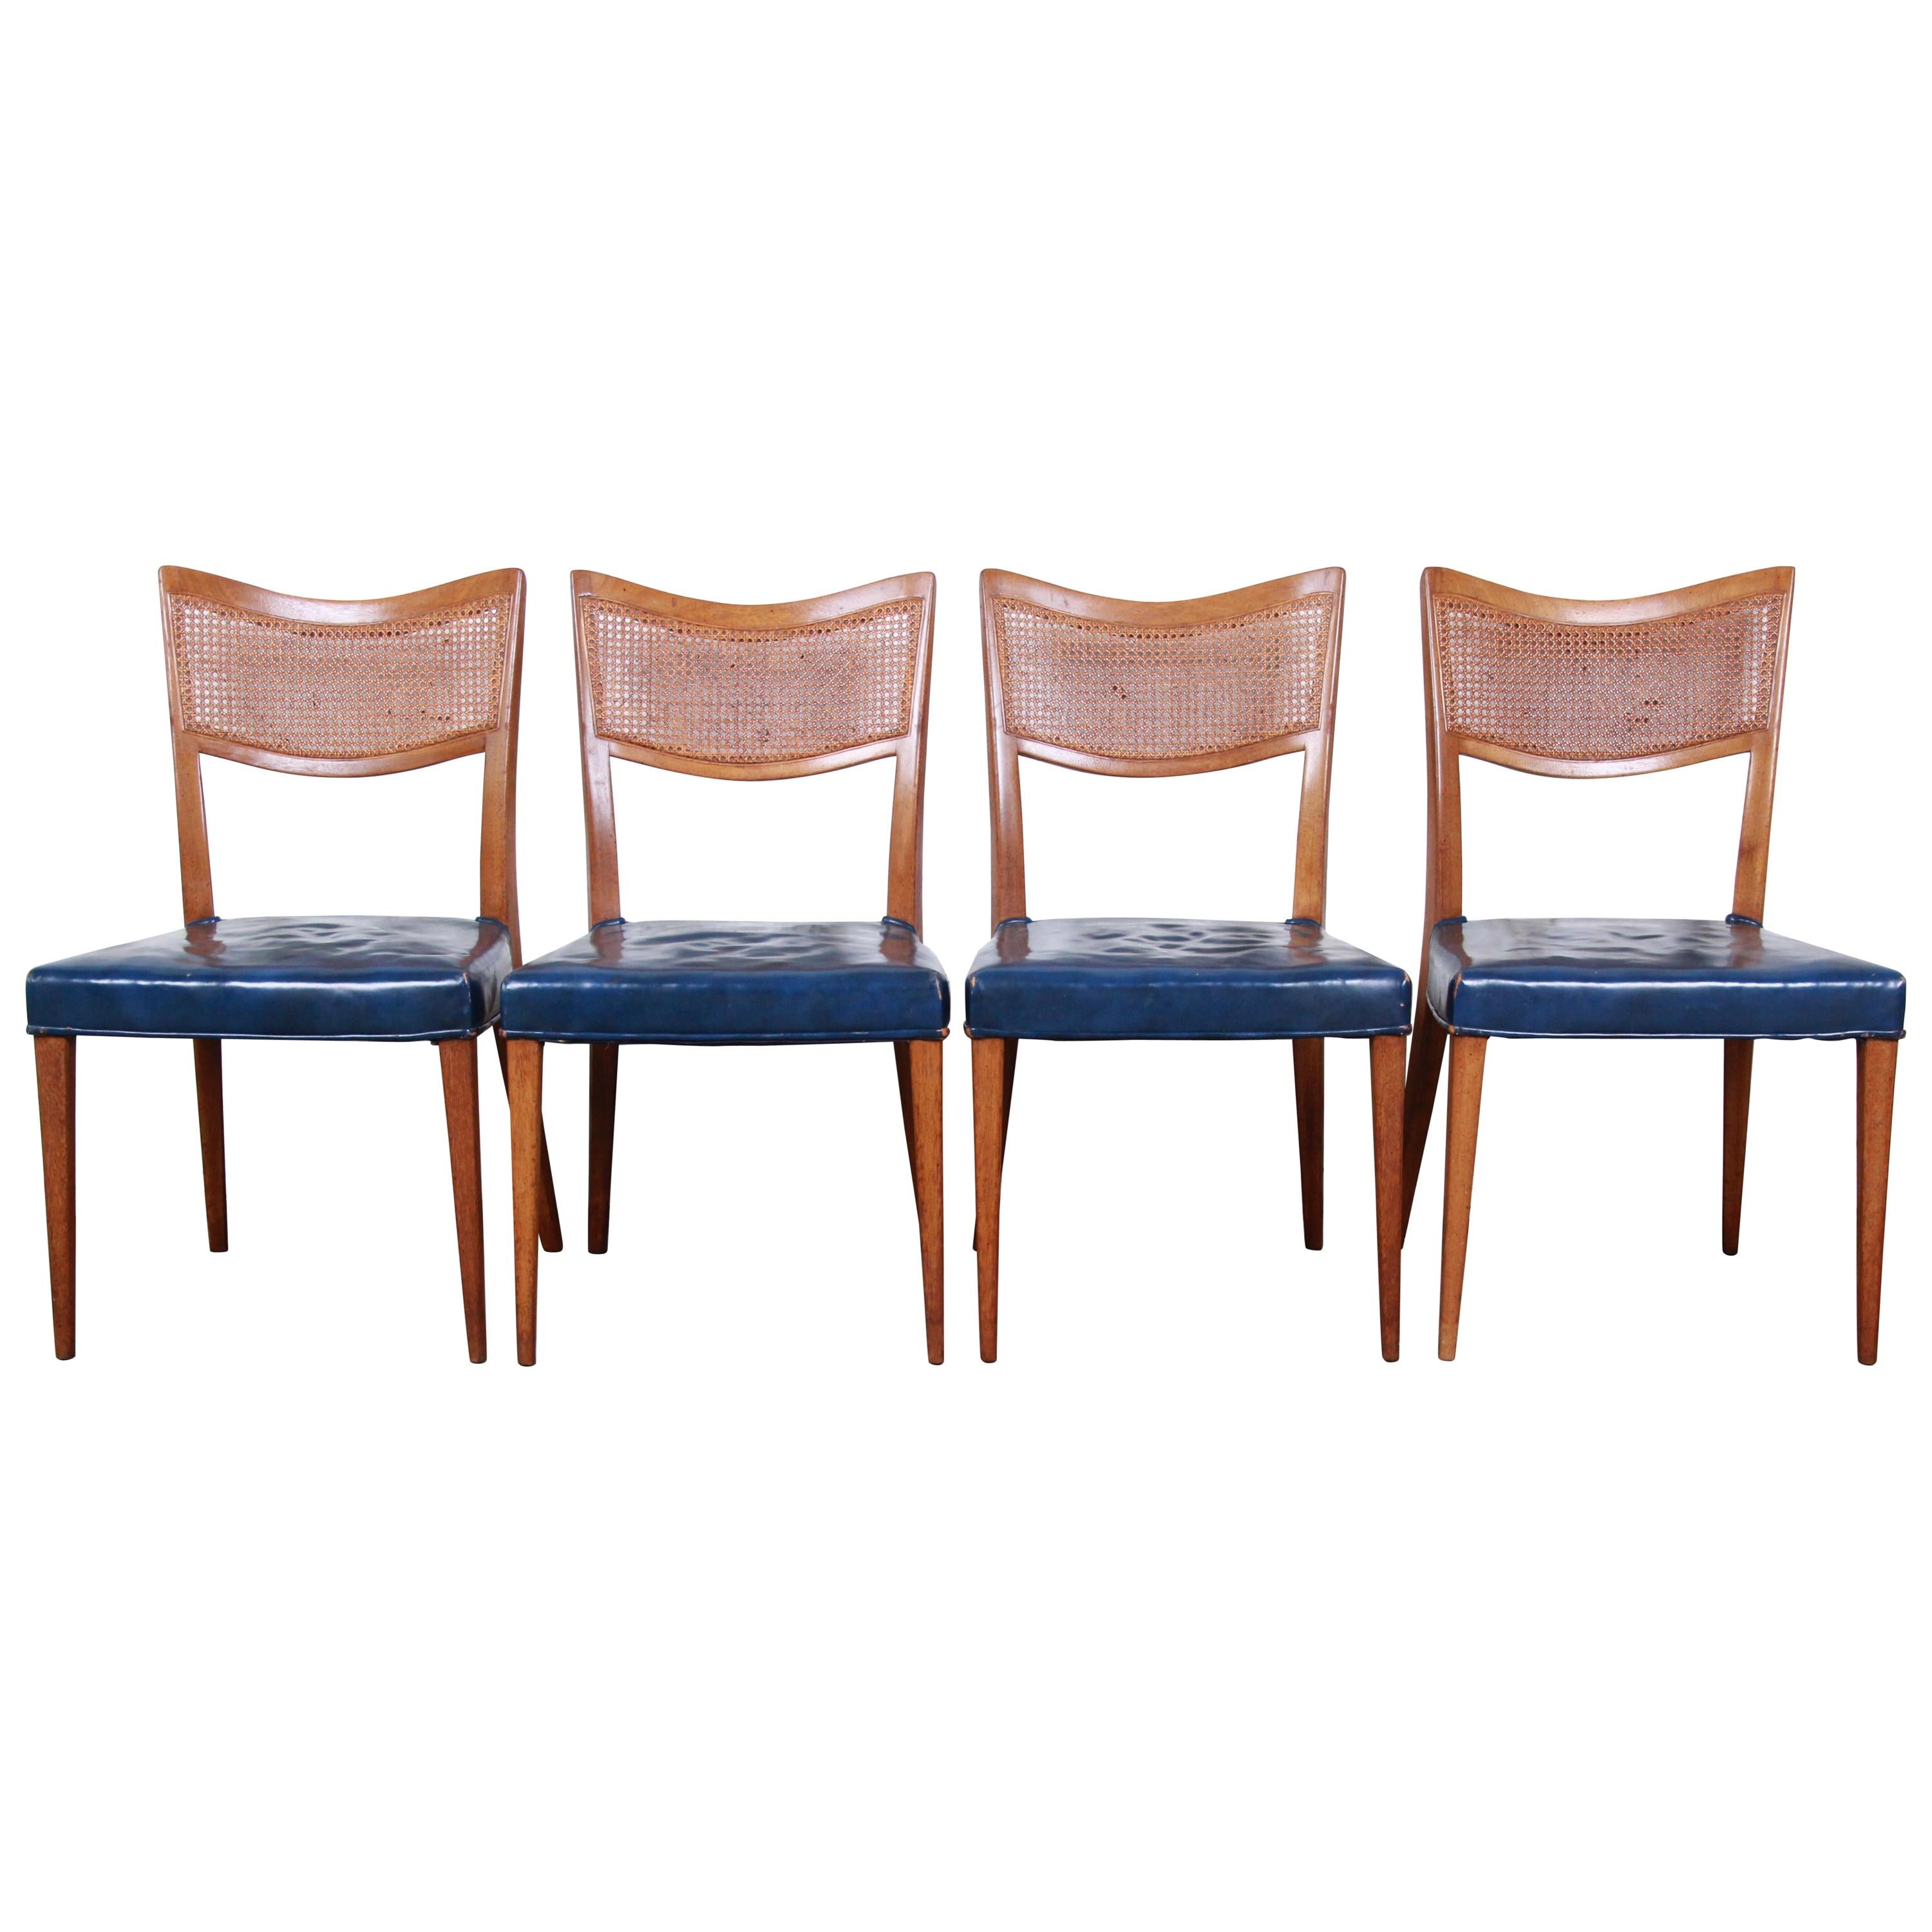 Harvey Probber Mid-Century Modern Mahogany and Cane Dining Chairs, Set of Four